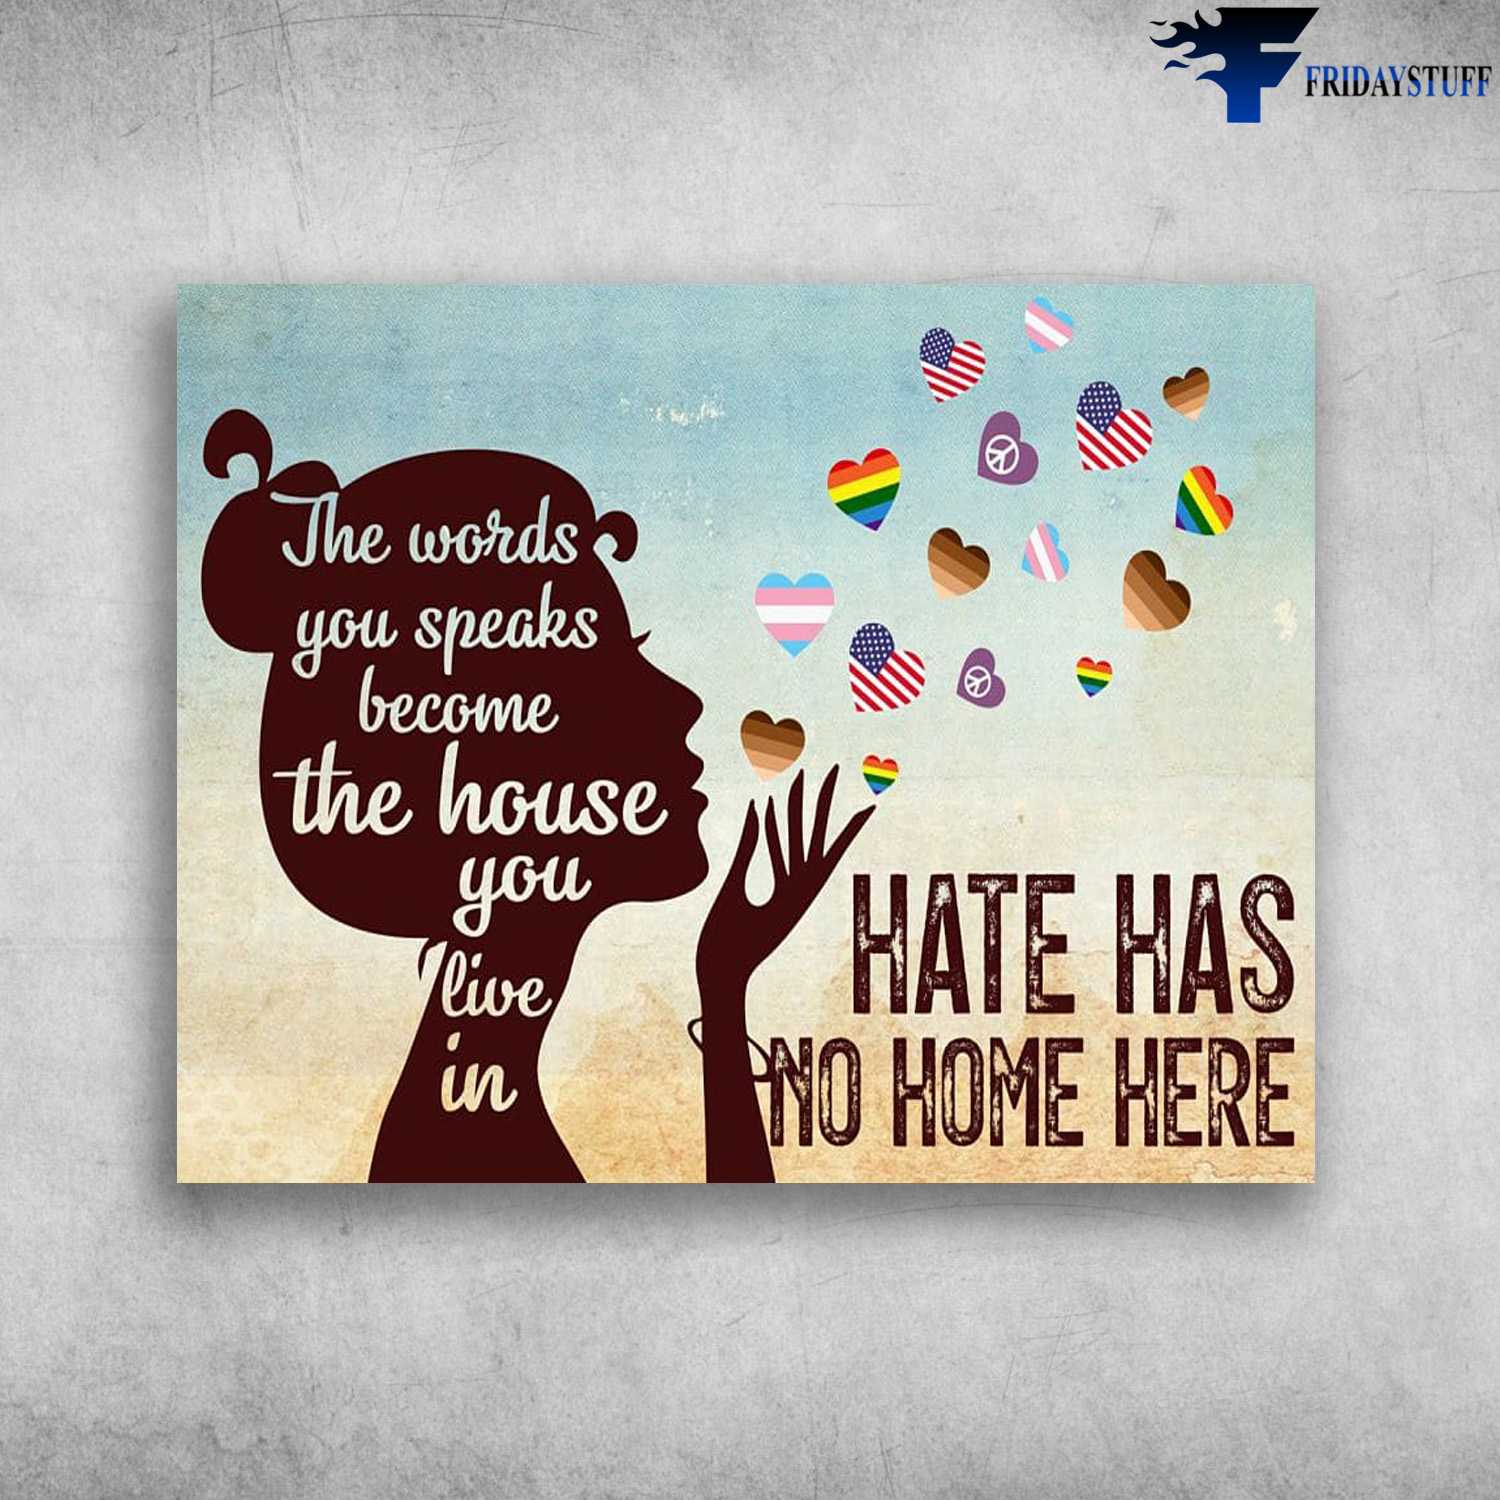 Awareness Poster, Discriminating Awareness, The Words You Speaks, Become The House You Live In, Hate Has No Home Here